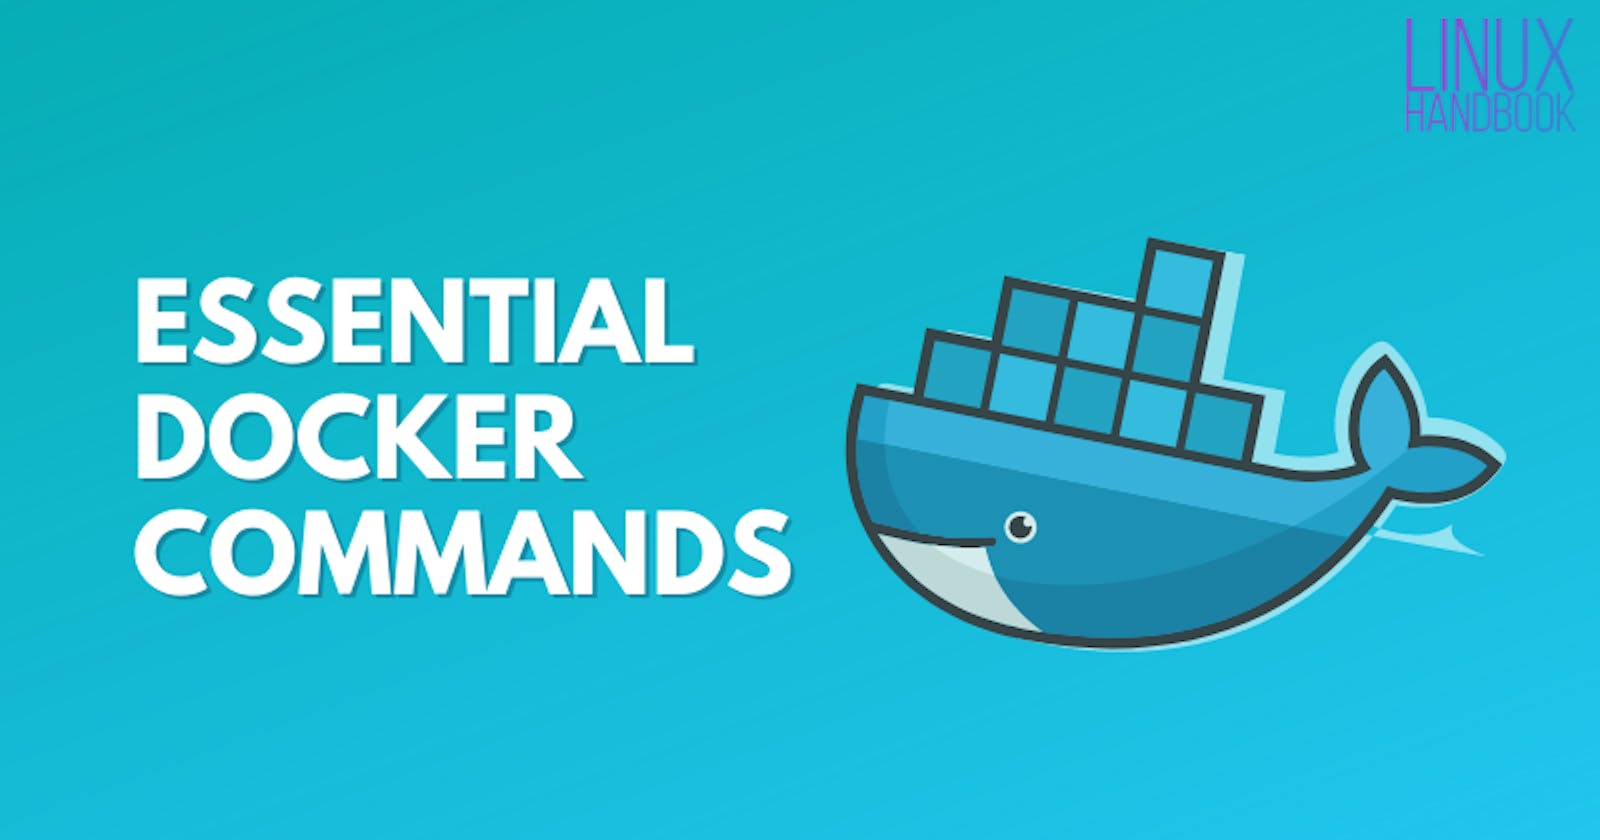 Top 50 Docker commands, grouped by their primary functions :